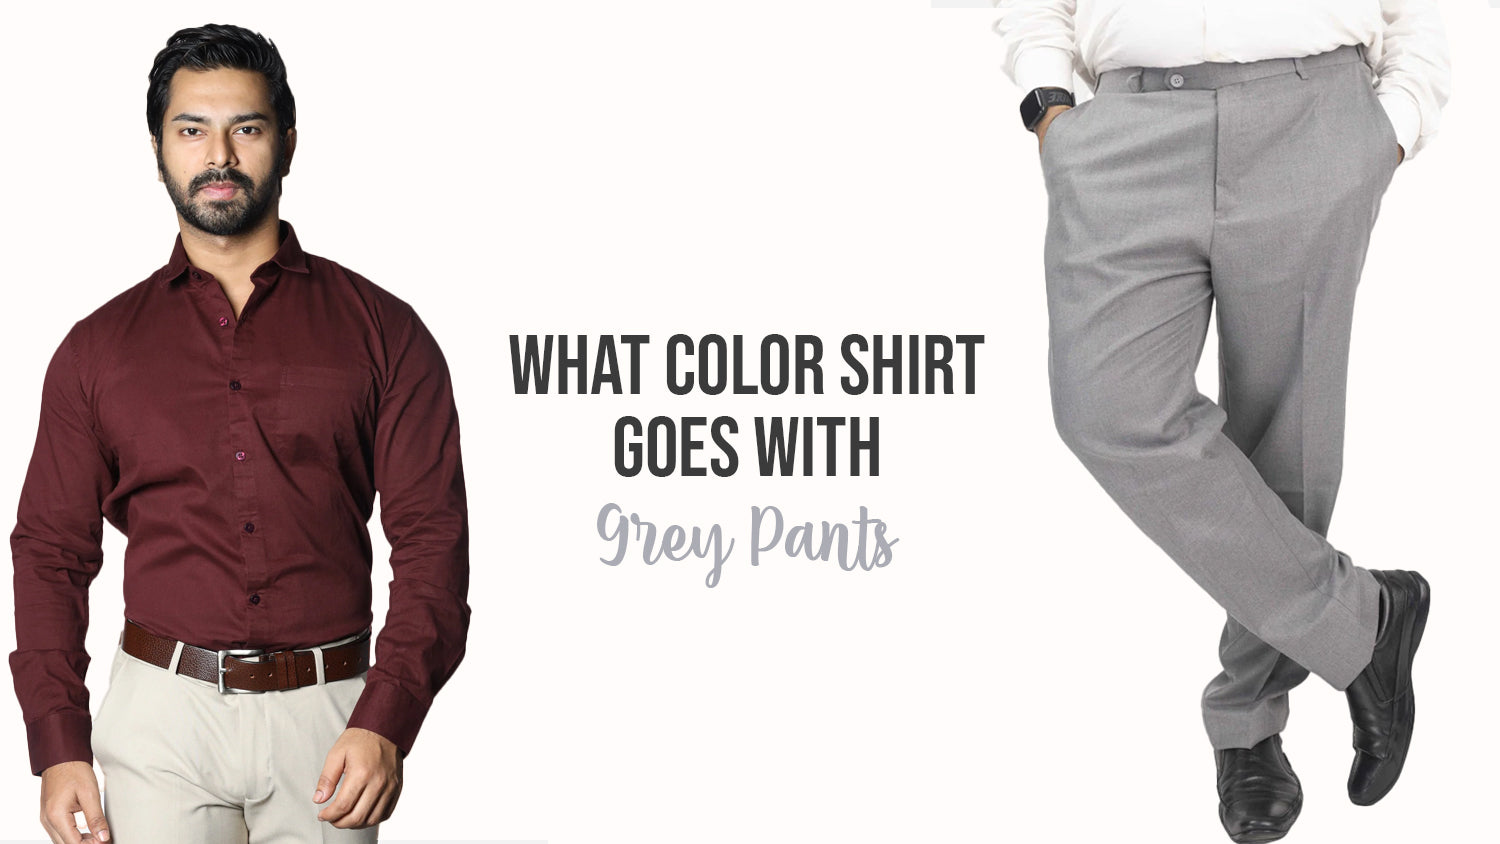 What Color Shirt Goes with Grey Pants